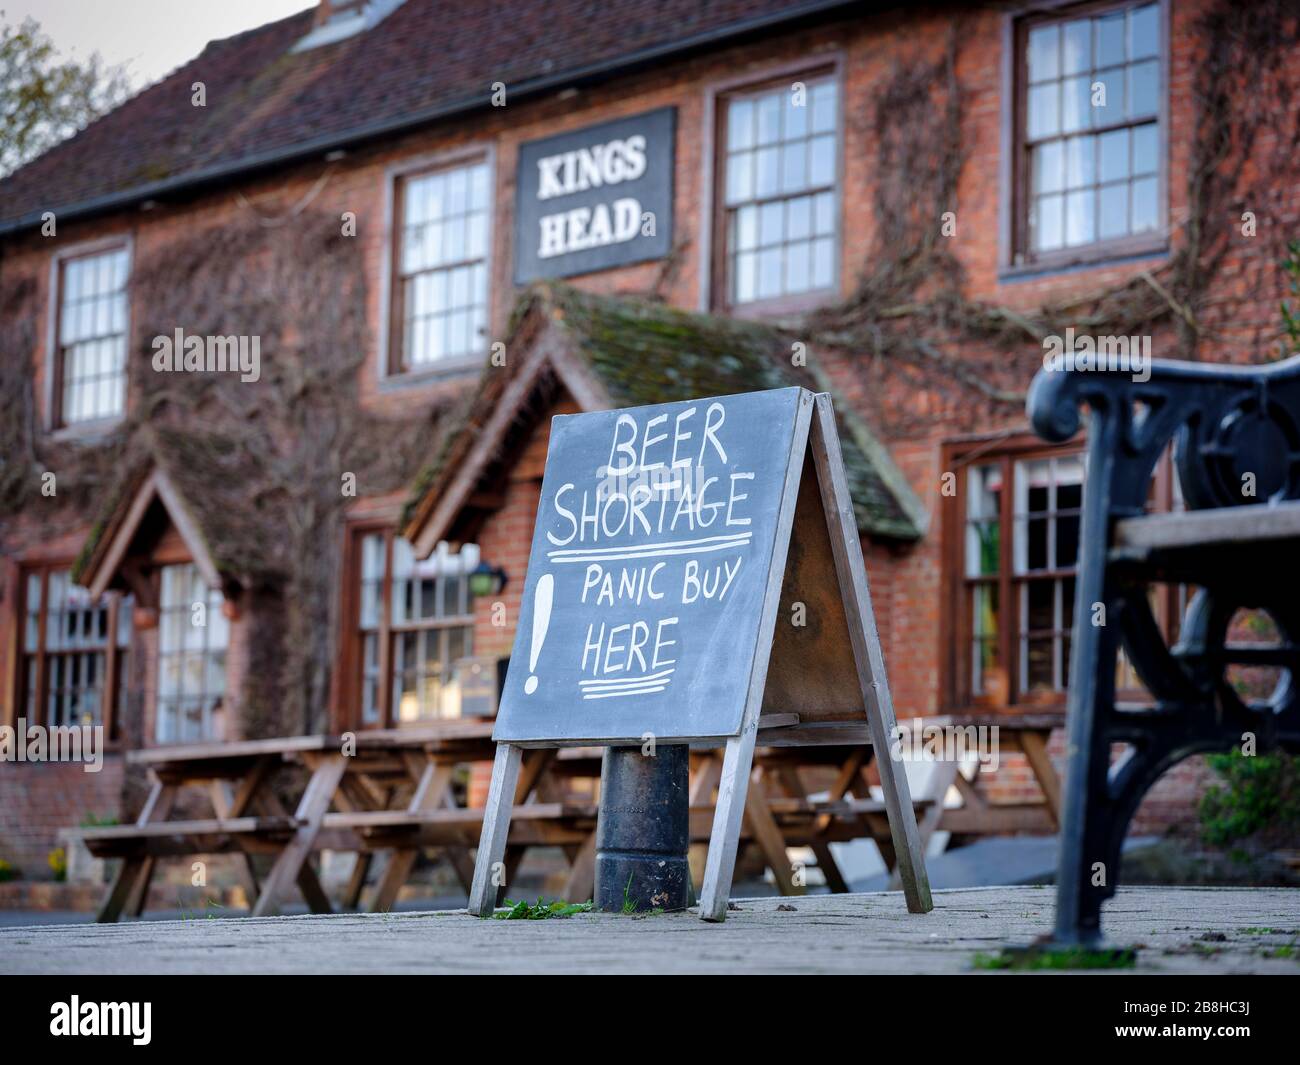 East Hoathly, UK. 22nd Mar, 2020. Panic buy beer: As panic buying continues across the UK pubs have been ordered to close as part of Covid-19 measures. In East Sussex the landlord of the Kings Head in East Hoathly has placed a light-hearted sign outside the pub saying 'beer shortage - panic buy beer here' Credit: Jim Holden/Alamy Live News Stock Photo